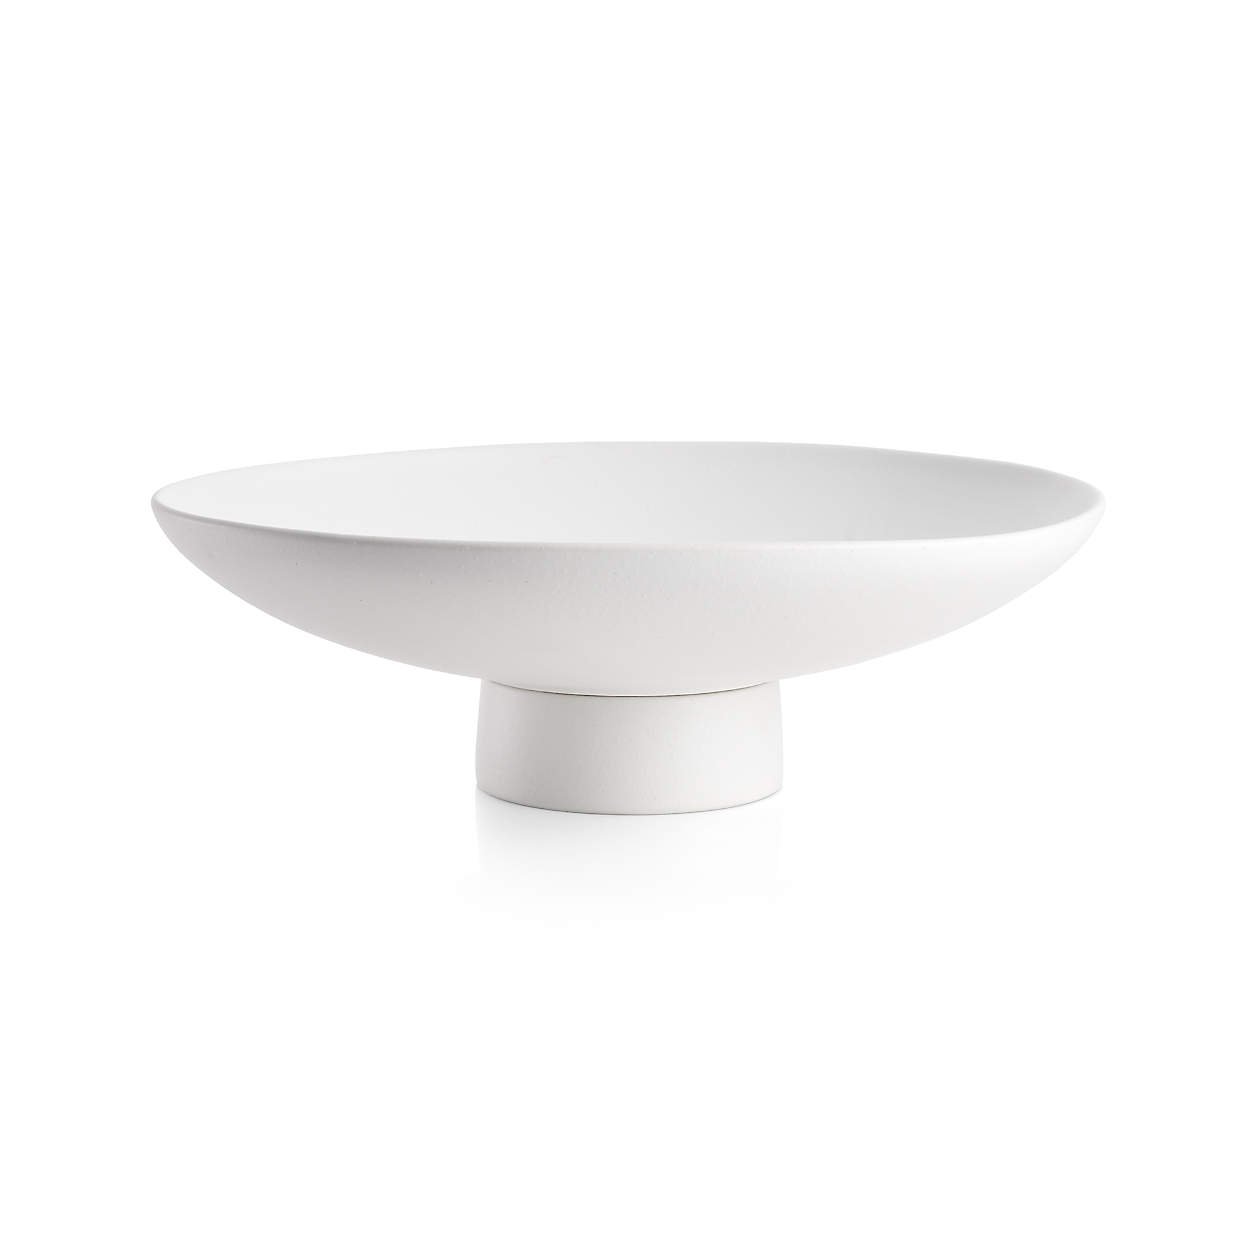 Sailor White Footed Bowl by Leanne Ford - Image 0